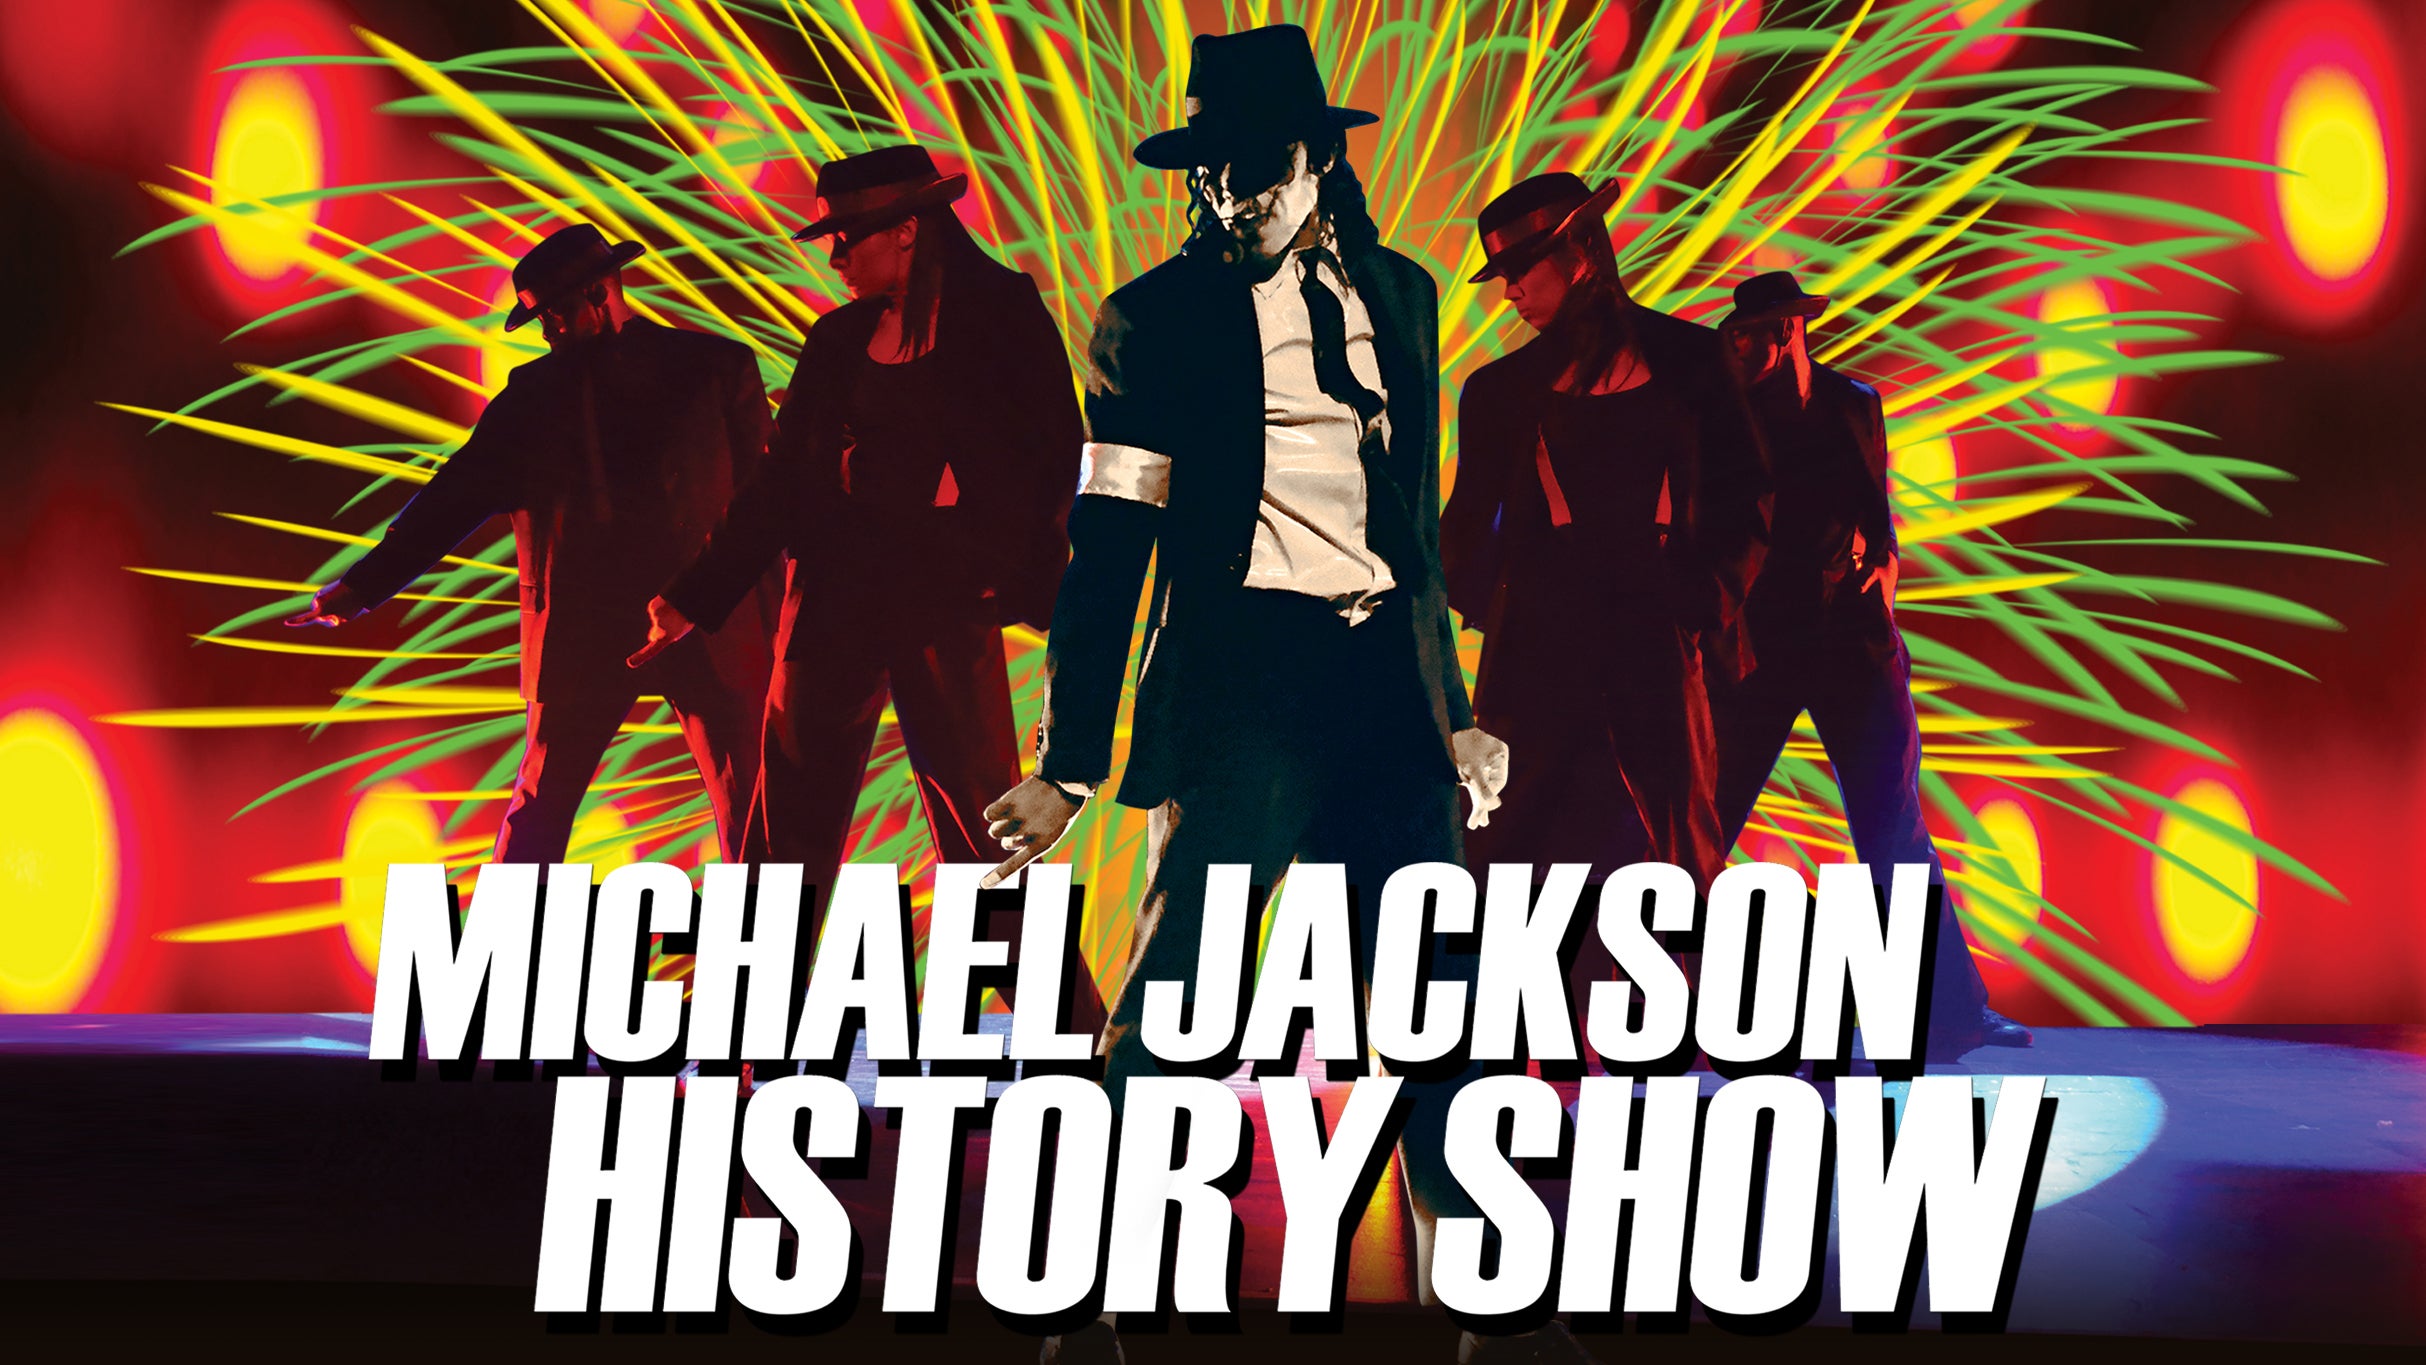 Michael Jackson History Show in Rama promo photo for Ticketmaster presale offer code